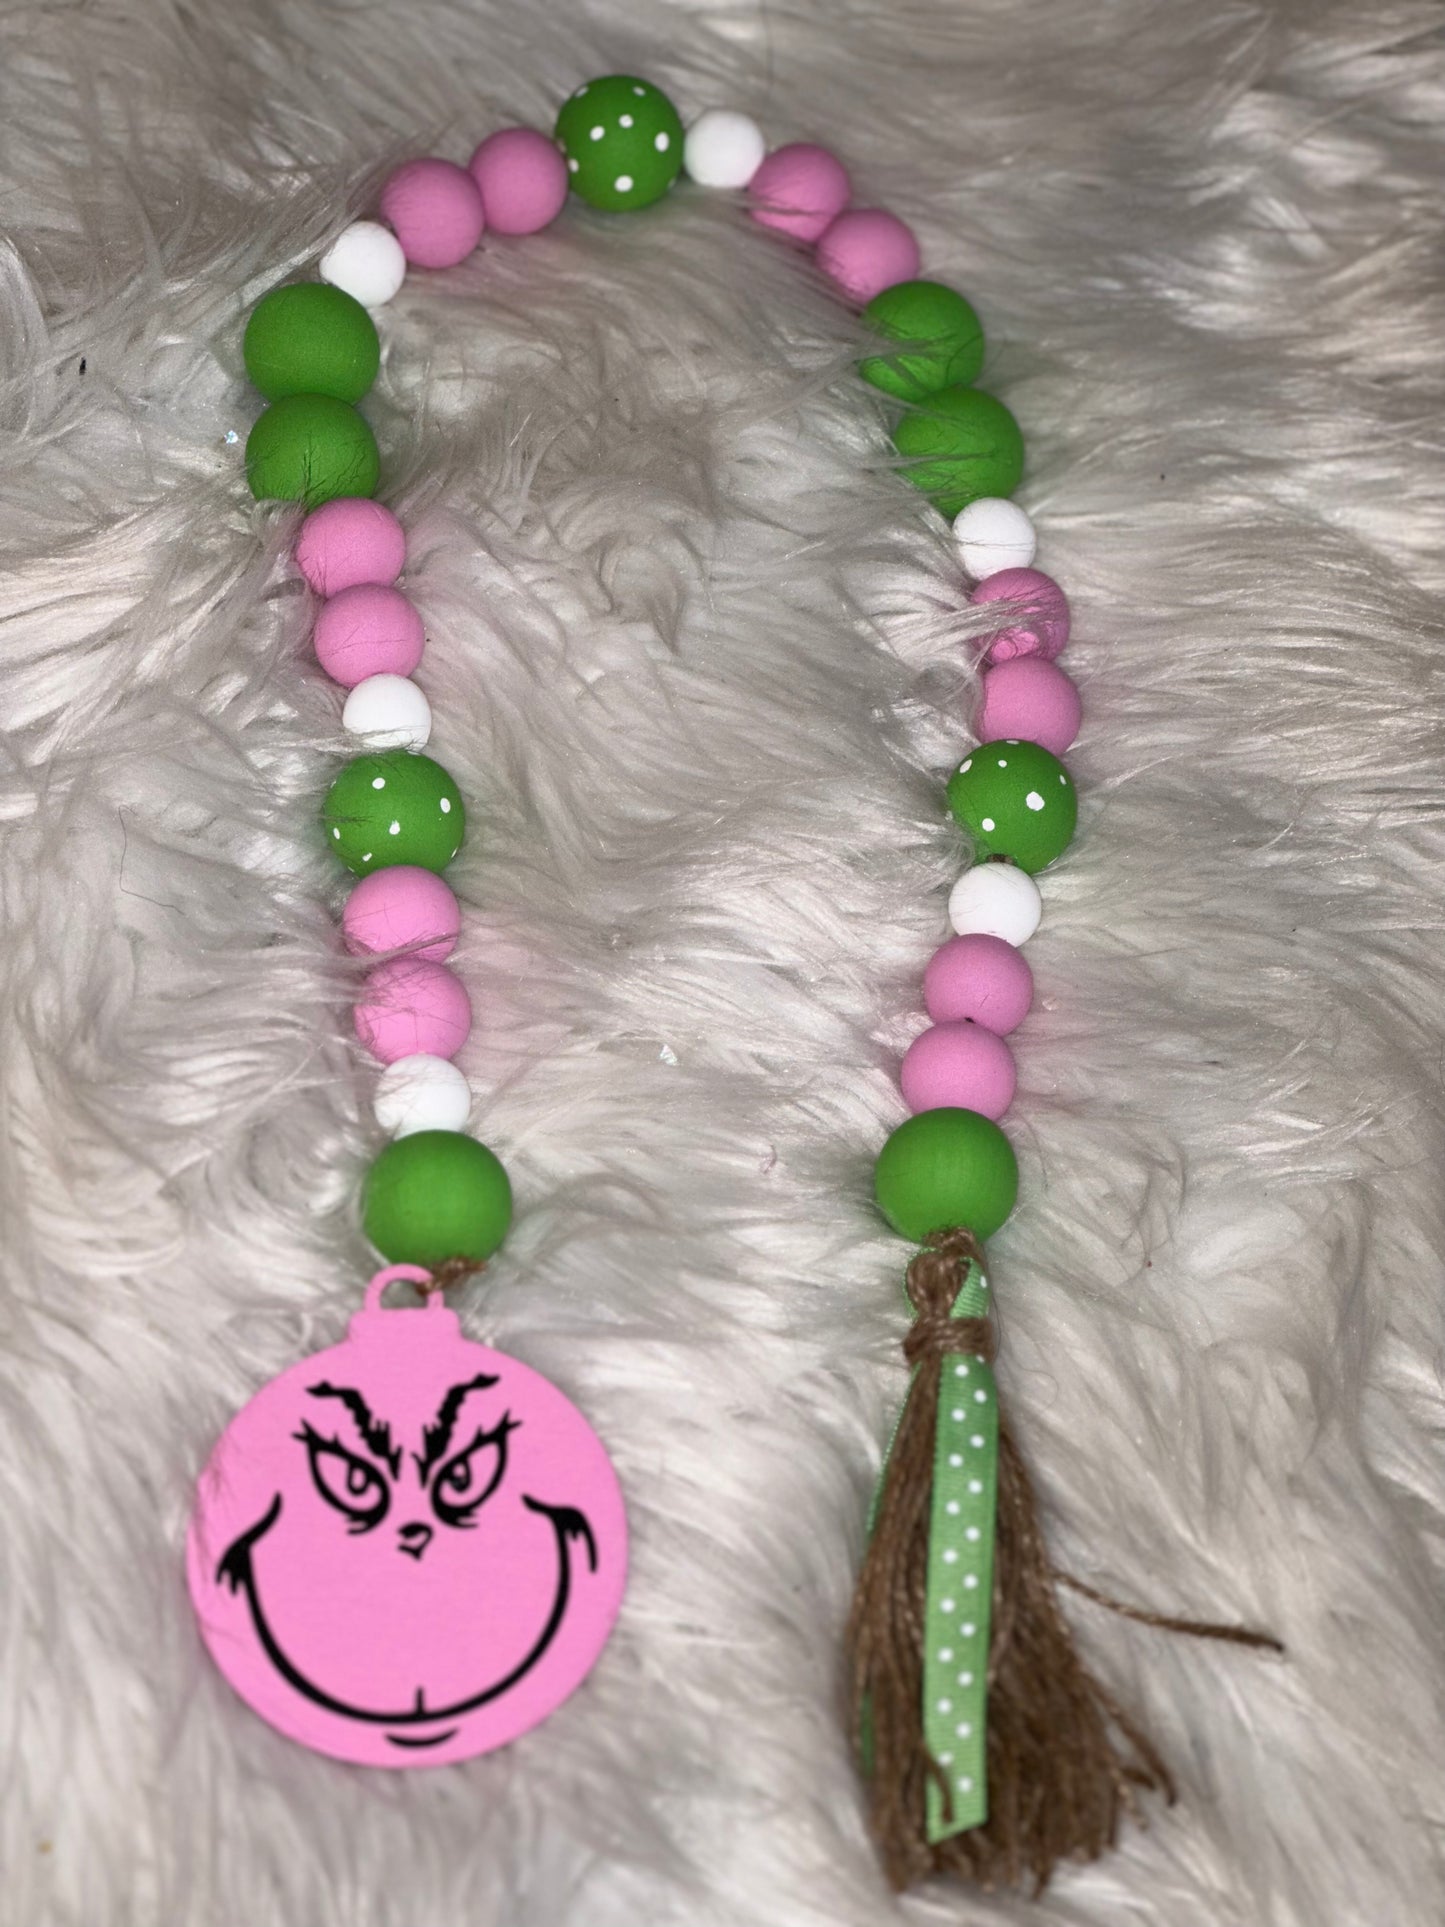 Grinch beads